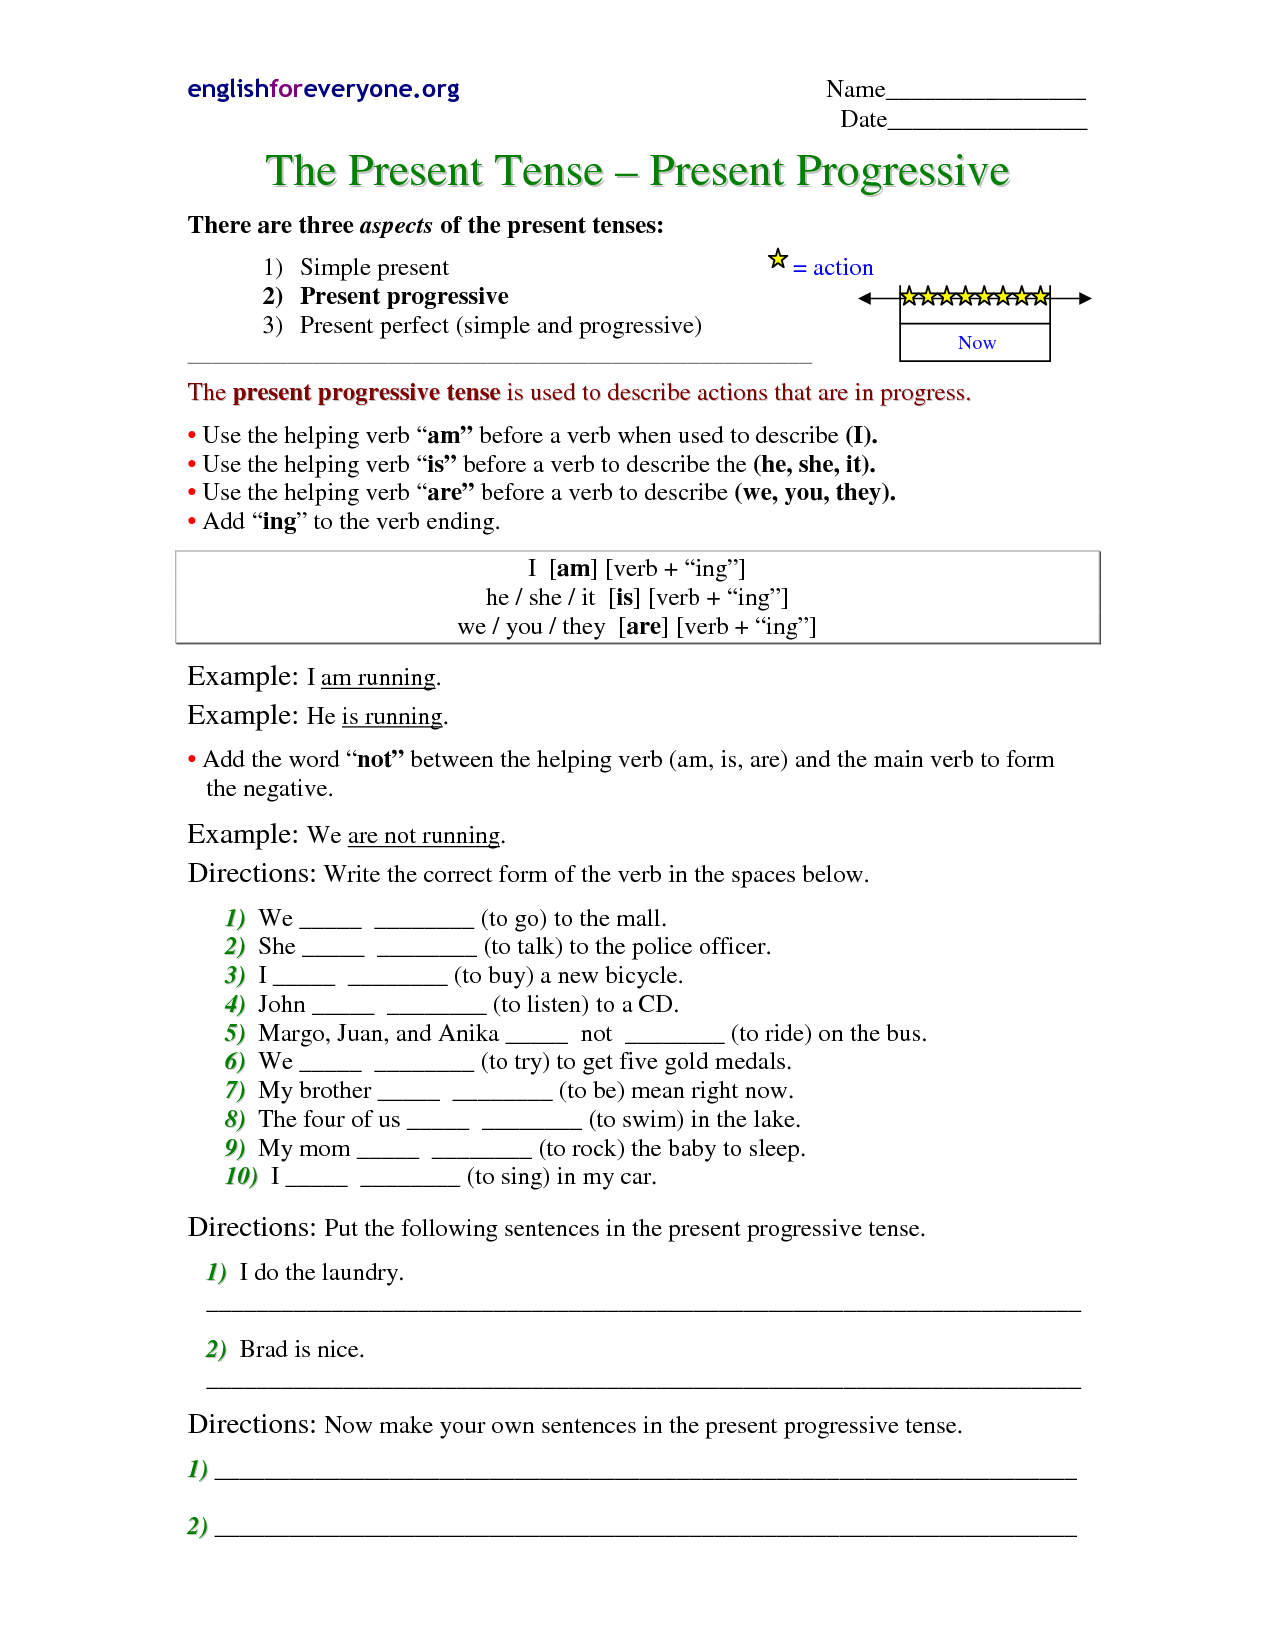 15-best-images-of-present-progressive-ing-worksheets-present-continuous-tense-exercises